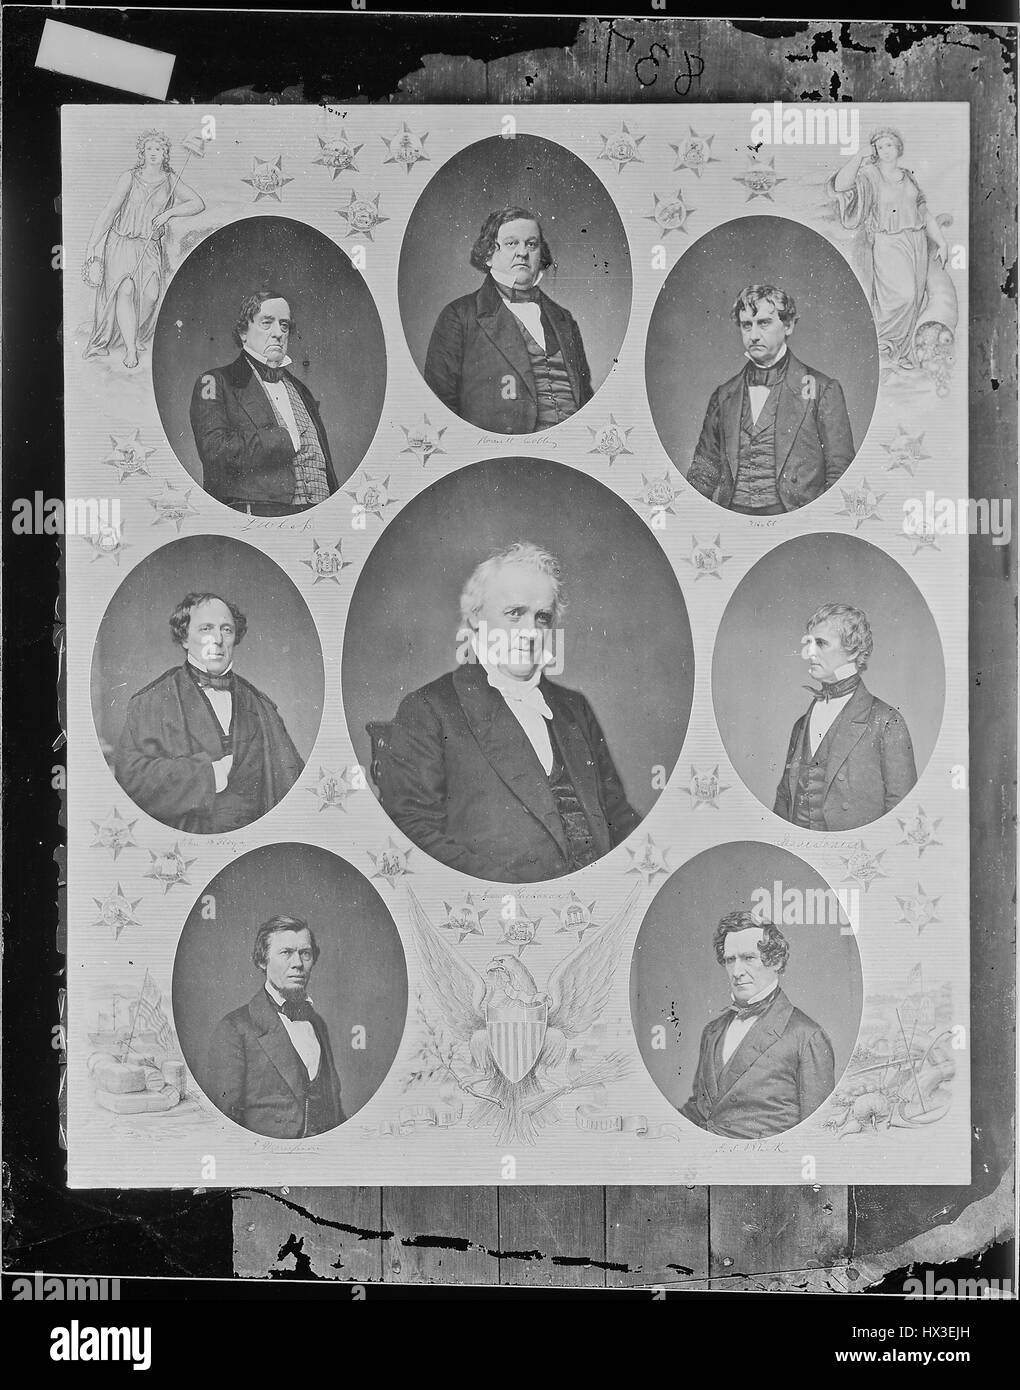 Portrait of 15th President of the United States James Buchanan (center), surrounded by portraits of the members of his cabinet (clockwise from top): Secretary of the Treasury Howell Cobb, Postmaster General Joseph Holt, Secretary of the Navy Isaac Toucey, Attorney General Jeremiah S. Black, Secretary of the Interior Jacob Thompson, Secretary of War John B. Floyd, and Secretary of State Lewis Cass, 1863. Image courtesy National Archives. Stock Photo